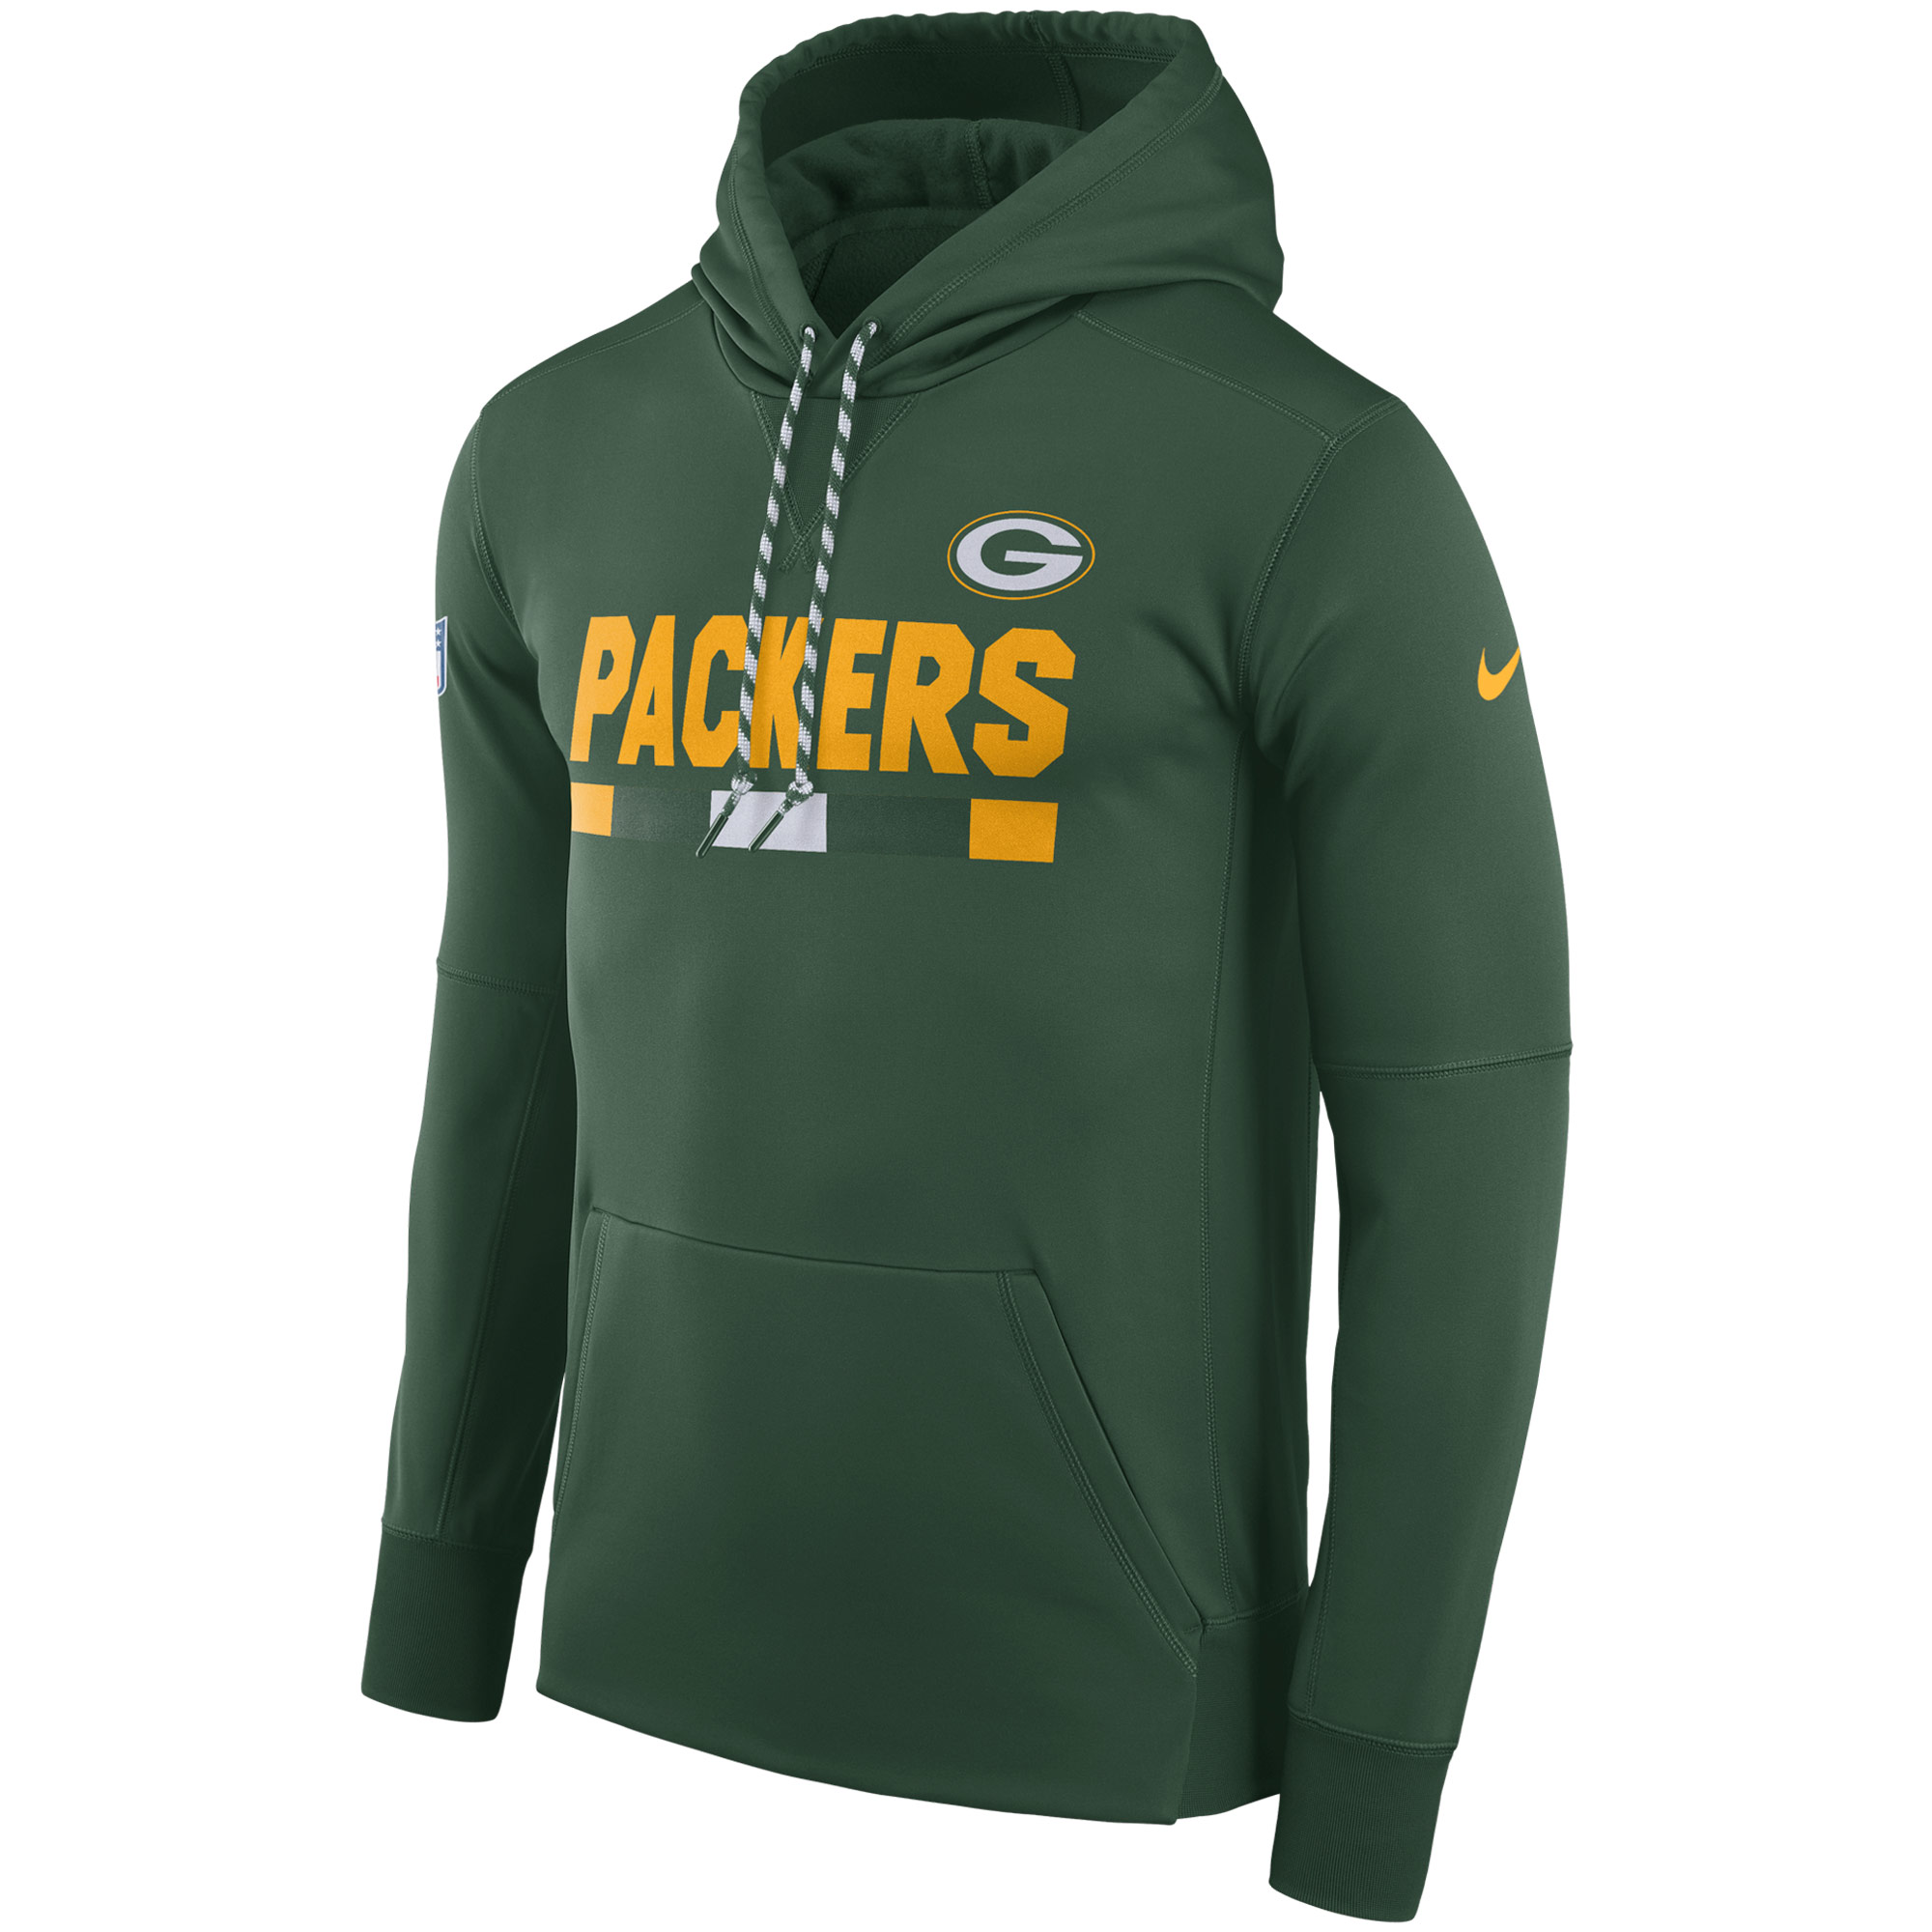 NFL Men Green Bay Packers Nike Green Sideline ThermaFit Performance PO Hoodie->green bay packers->NFL Jersey